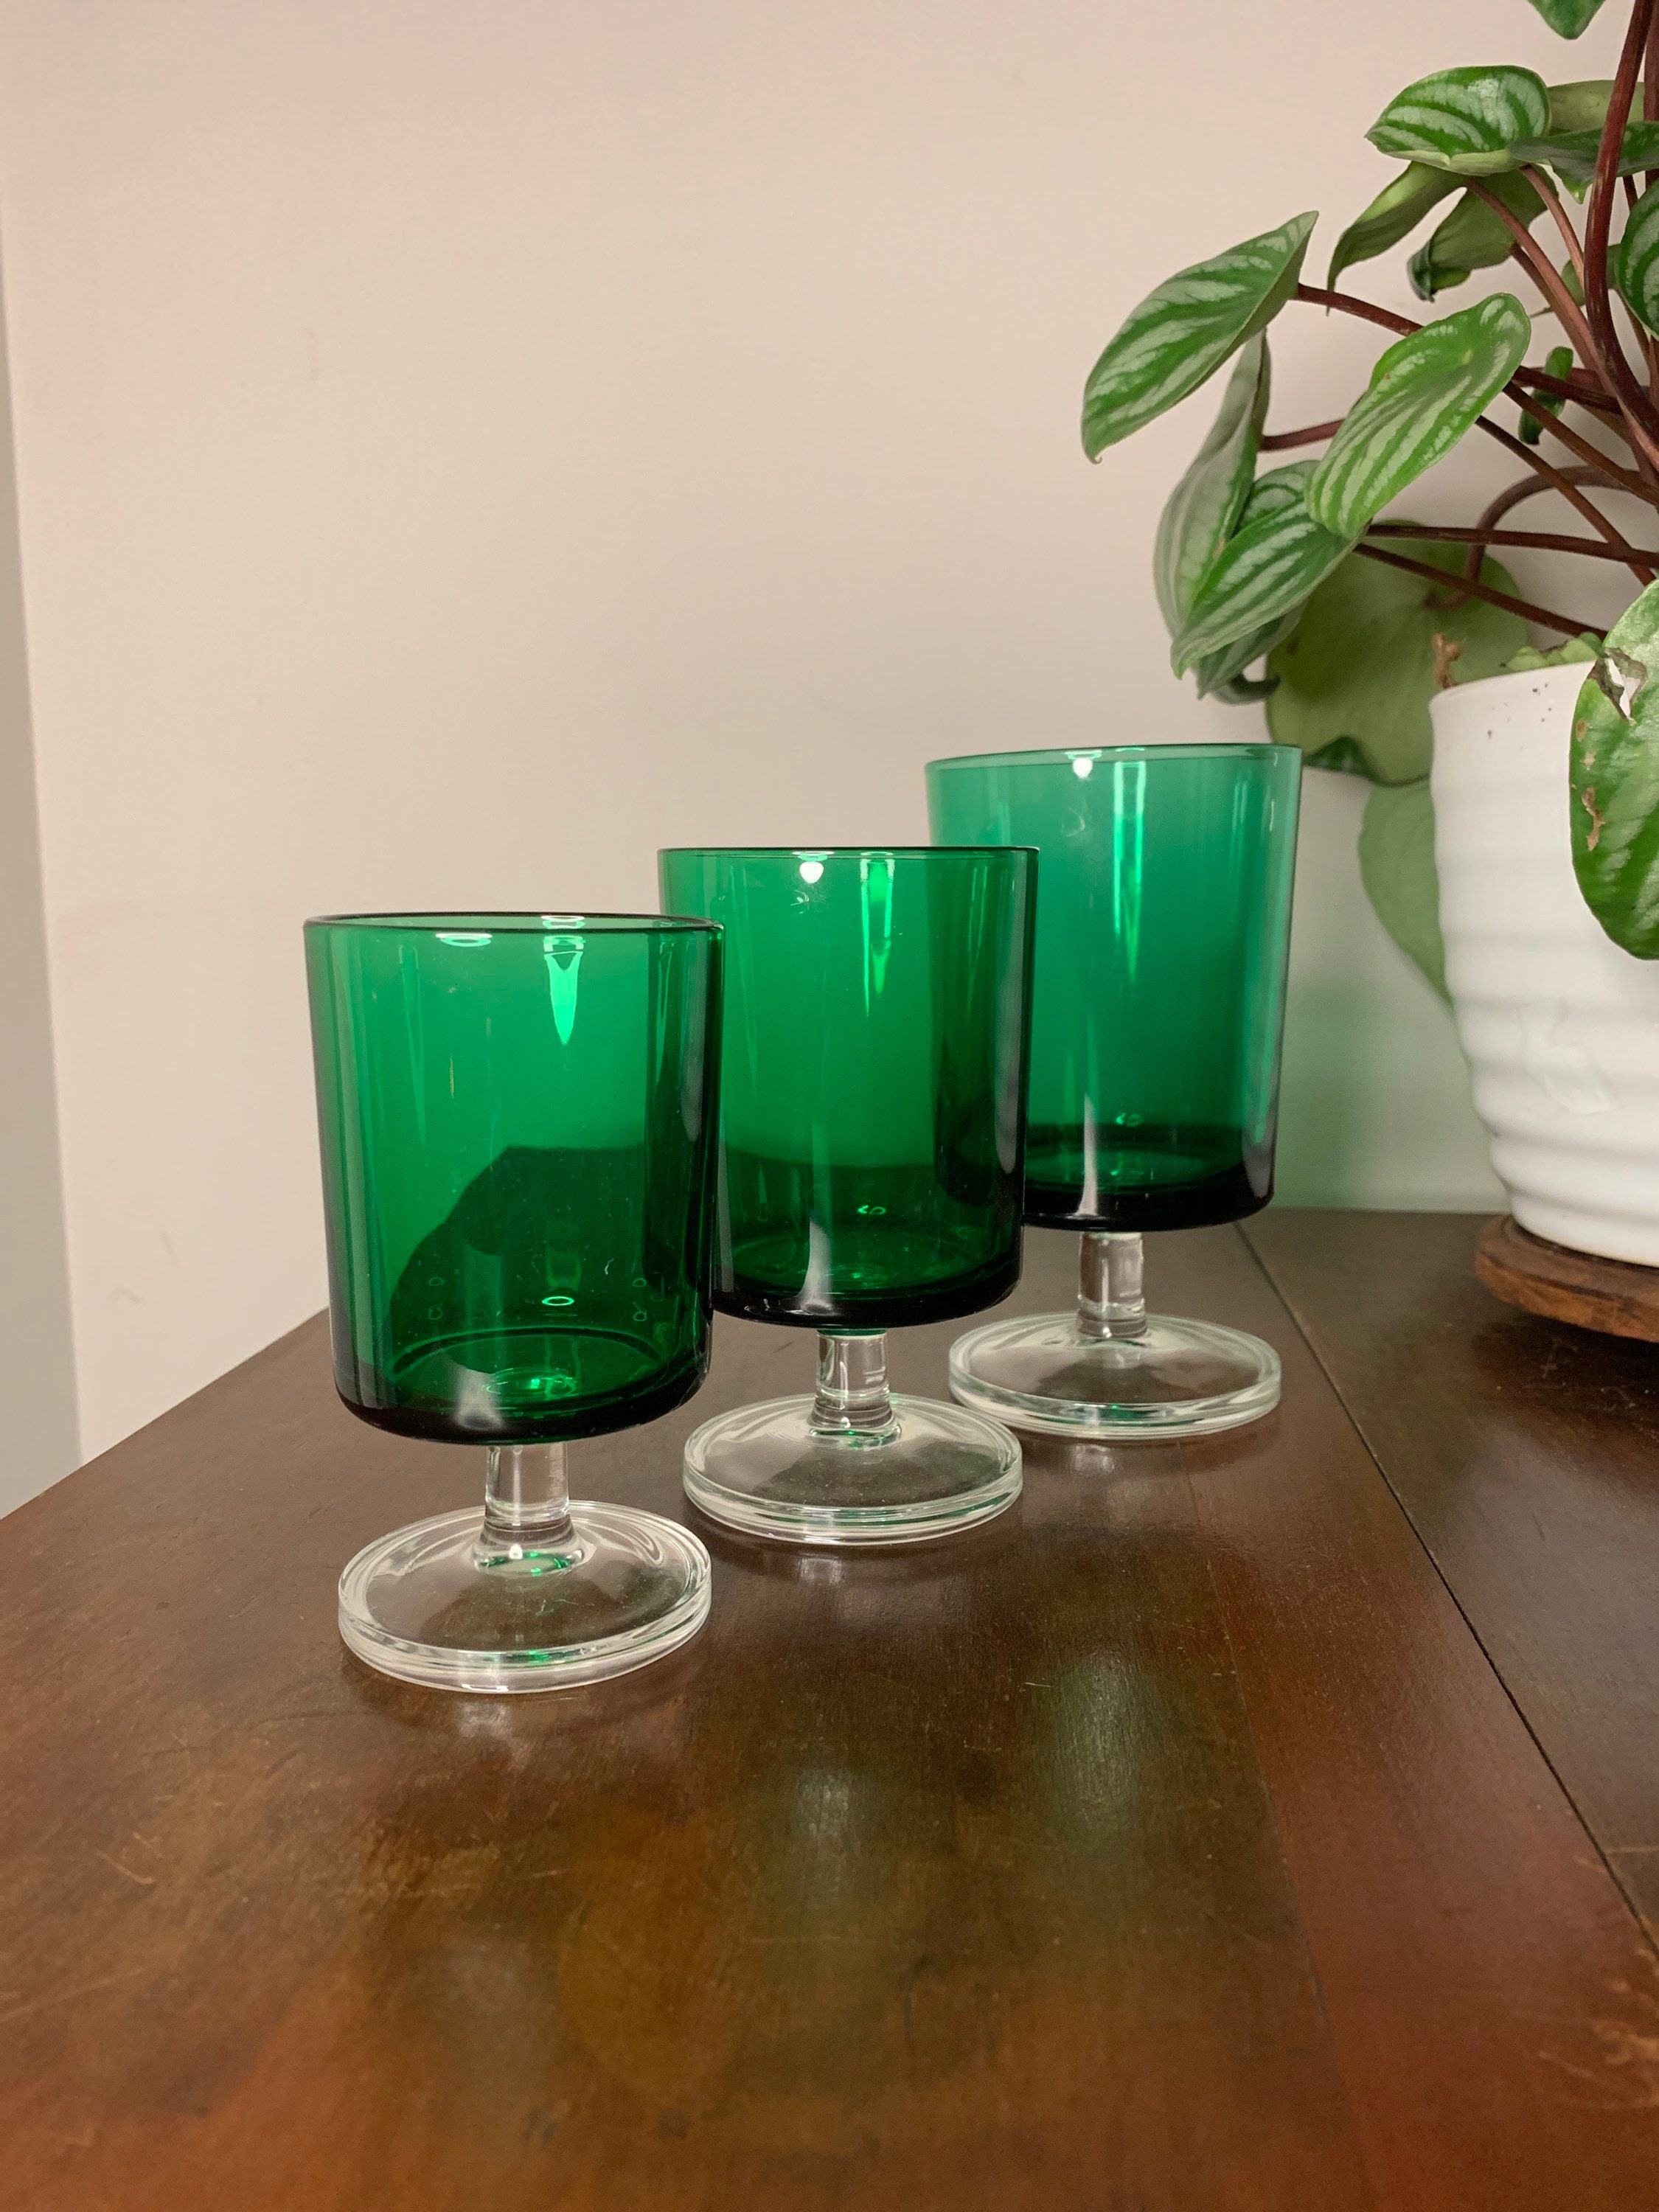 EC10170 - Ecology Classic Set of 4 Stemless Cocktail Glasses 530ml